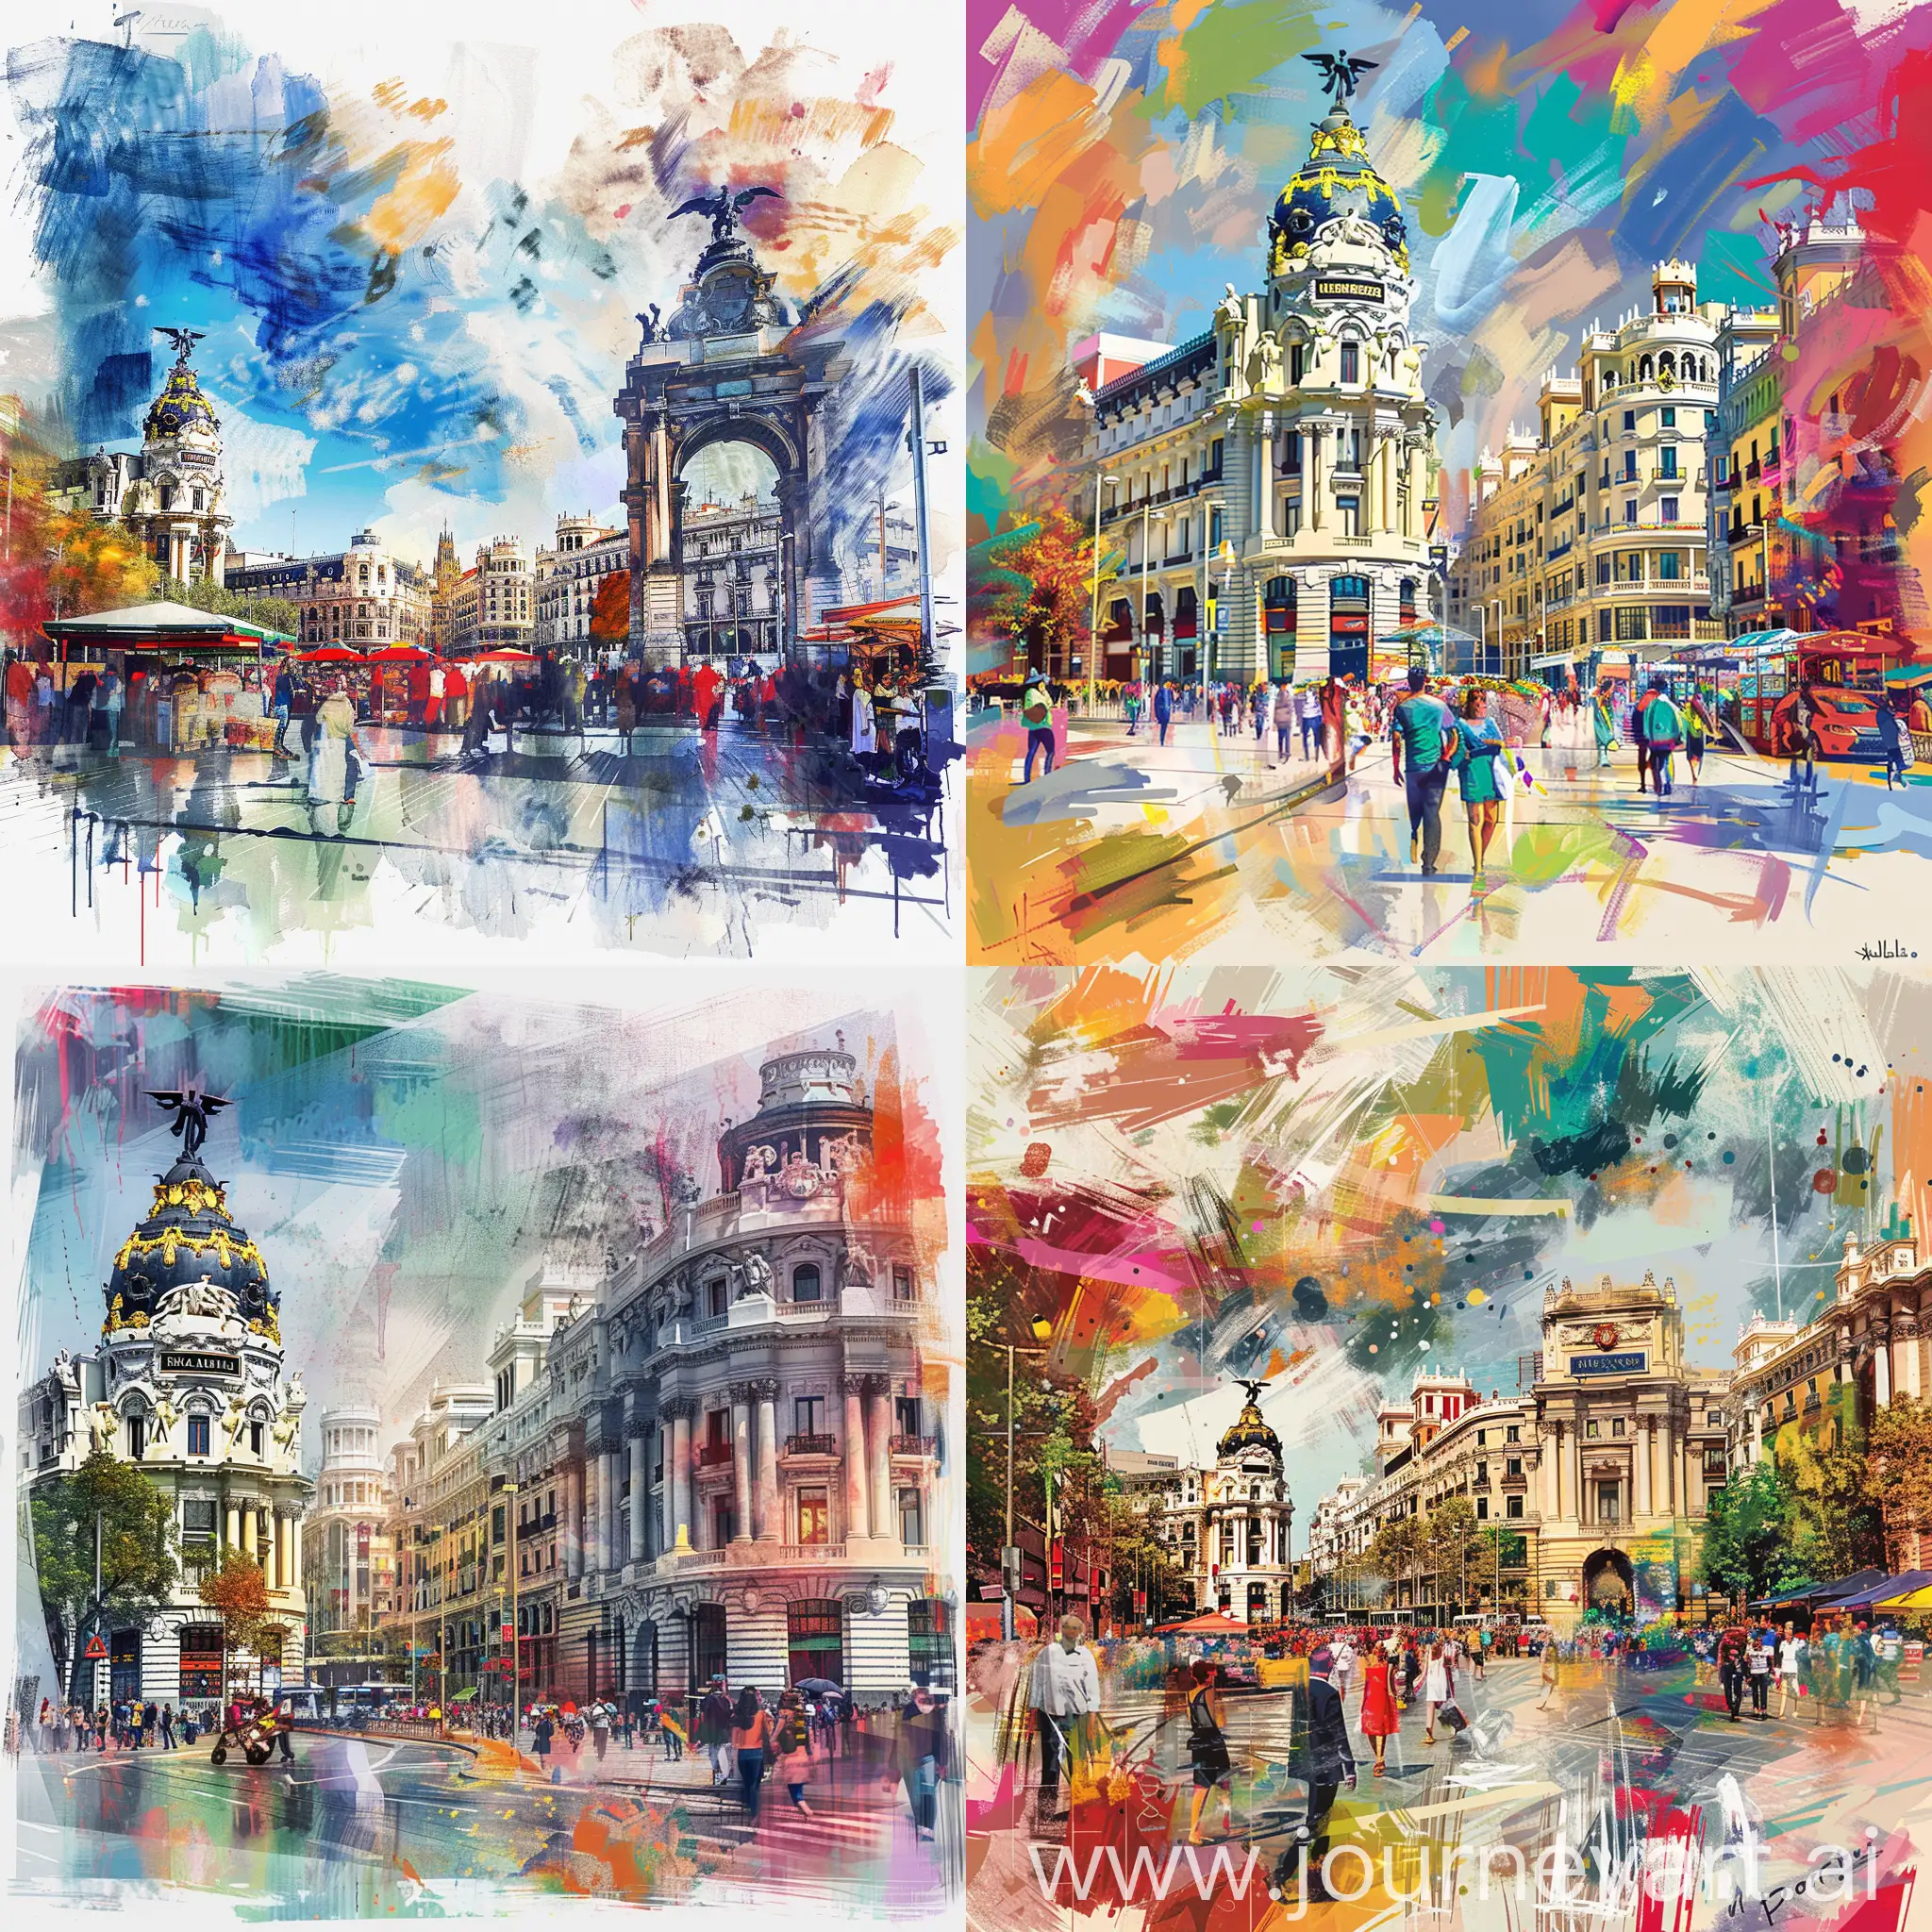 Use a combination of artistic styles that reflect the diversity and energy of Madrid. It incorporates recognizable elements of the city, such as the Puerta de Alcalá, the Royal Palace, the Prado Museum and the La Latina street market. Experiment with vibrant colors and dynamic brush strokes to create an image that inspires the desire to travel and discover.
